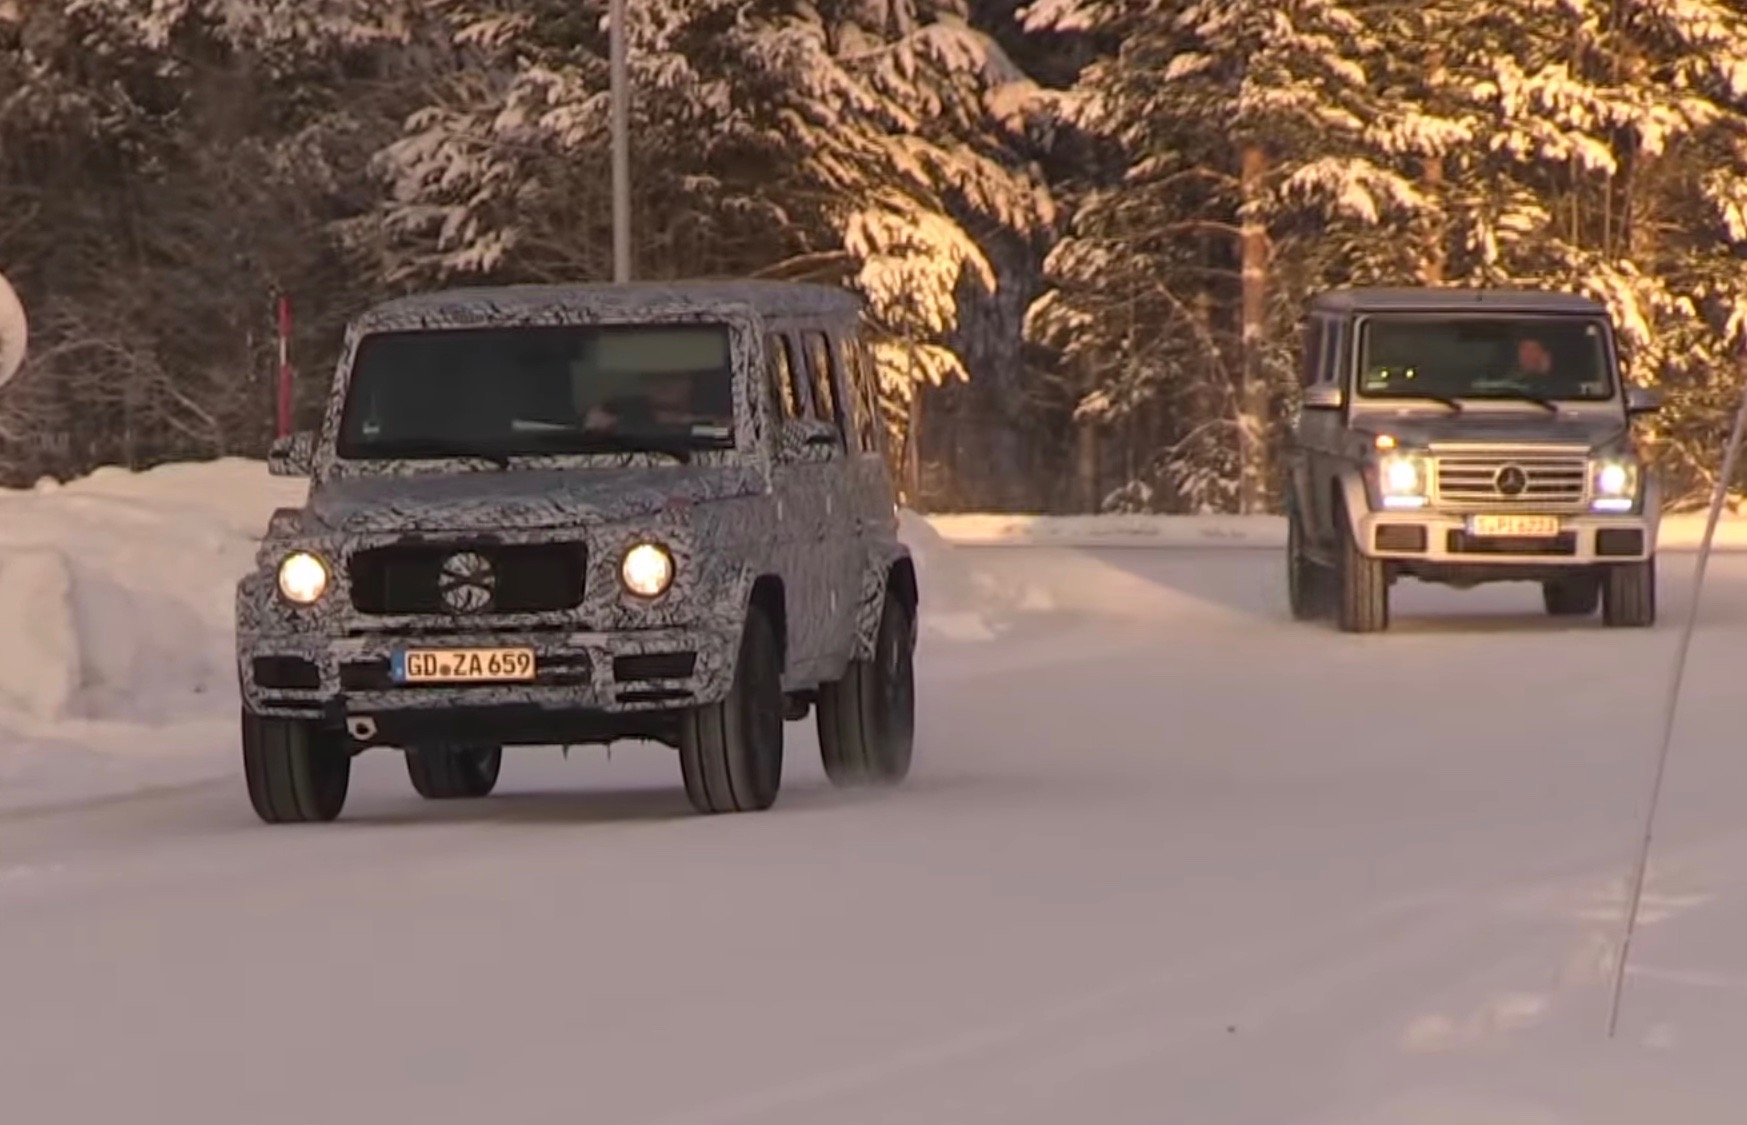 2018 Mercedes-Benz G-Class spotted winter testing, looks bigger (video)